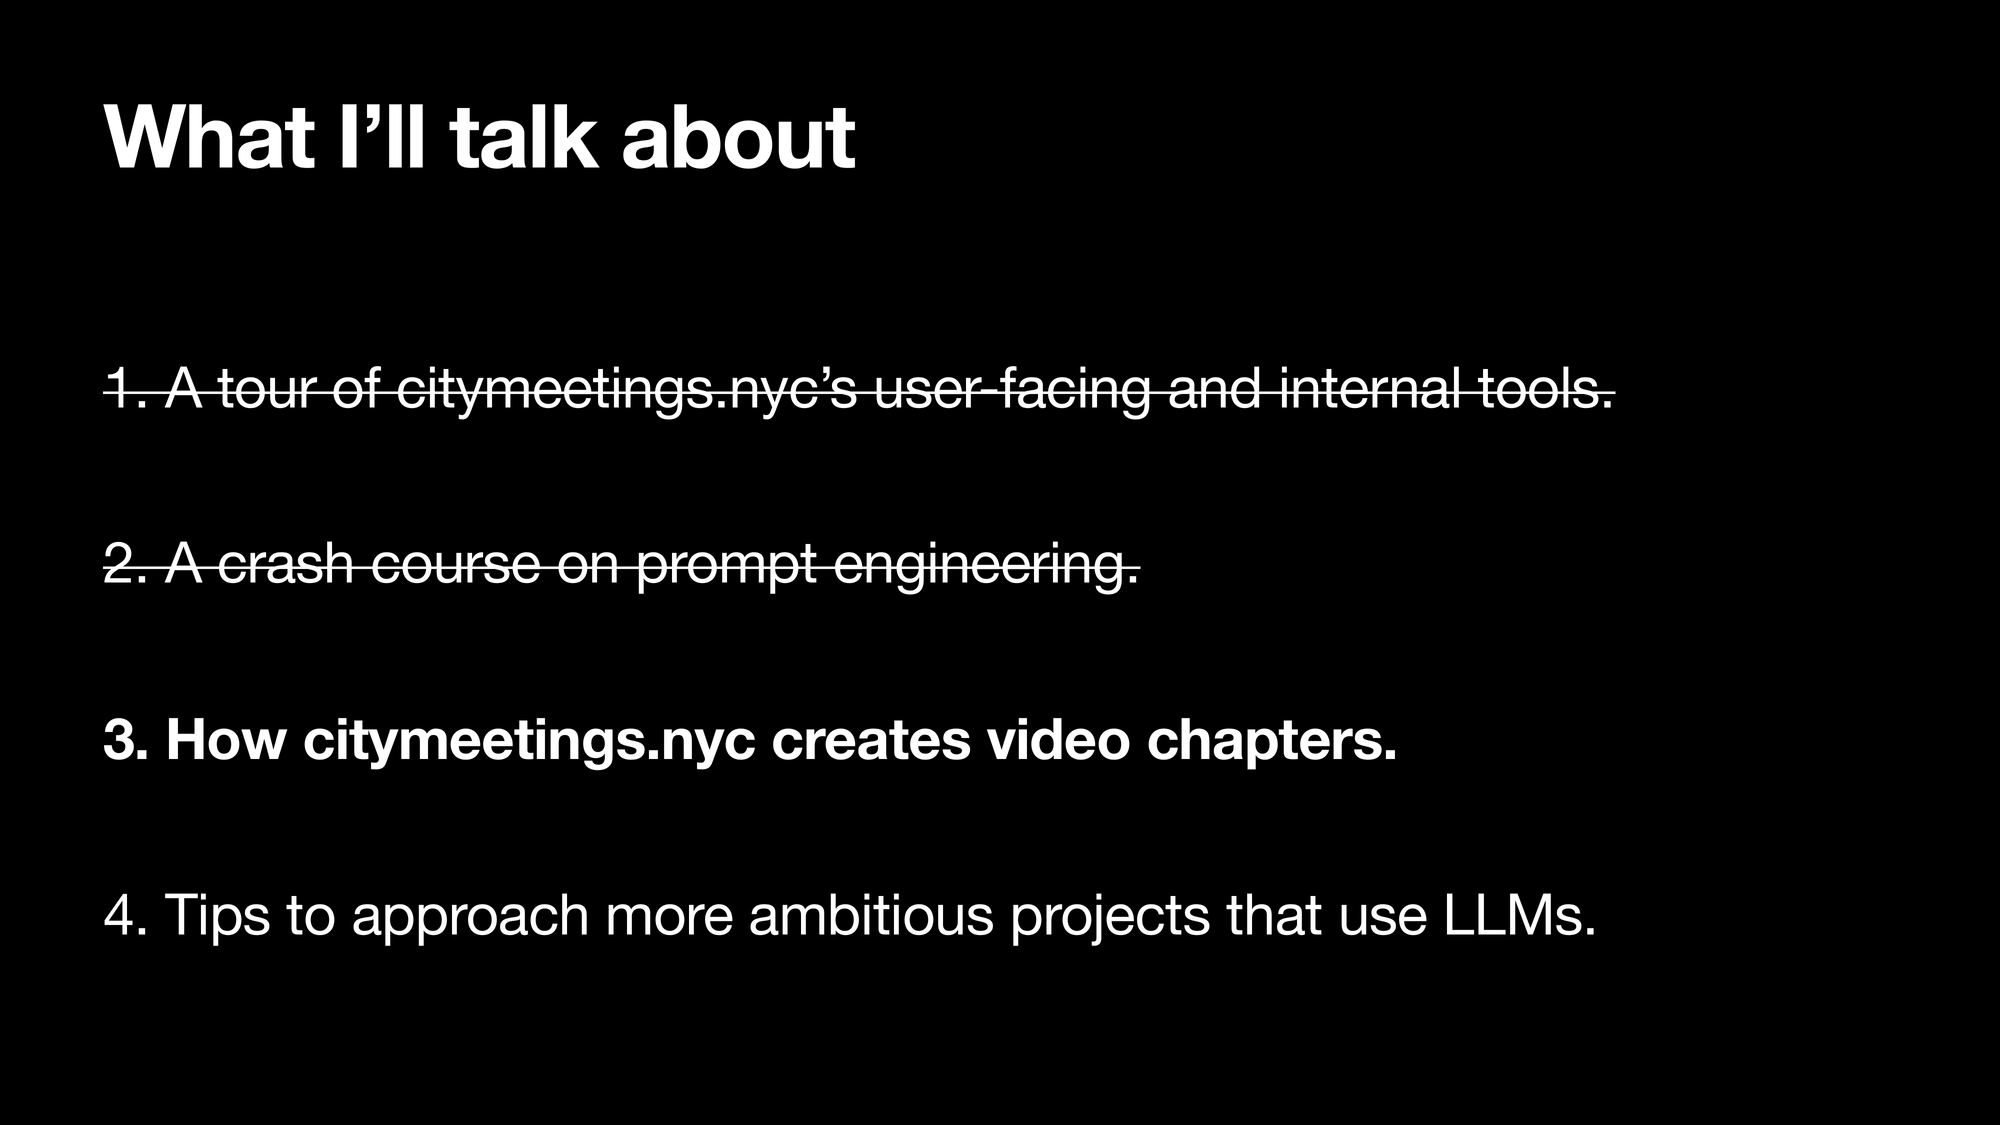 What I’ll talk about. 1. A tour of citymeetings.nycs user-facing and internal tools. 2. A crash course on writing an effective prompt. 3. How citymeetings.nyc creates video chapters. 4. Tips to approach more ambitious projects that use LLMSs. Section 1 and 2 is striked-out, section 3 is highlighted.
